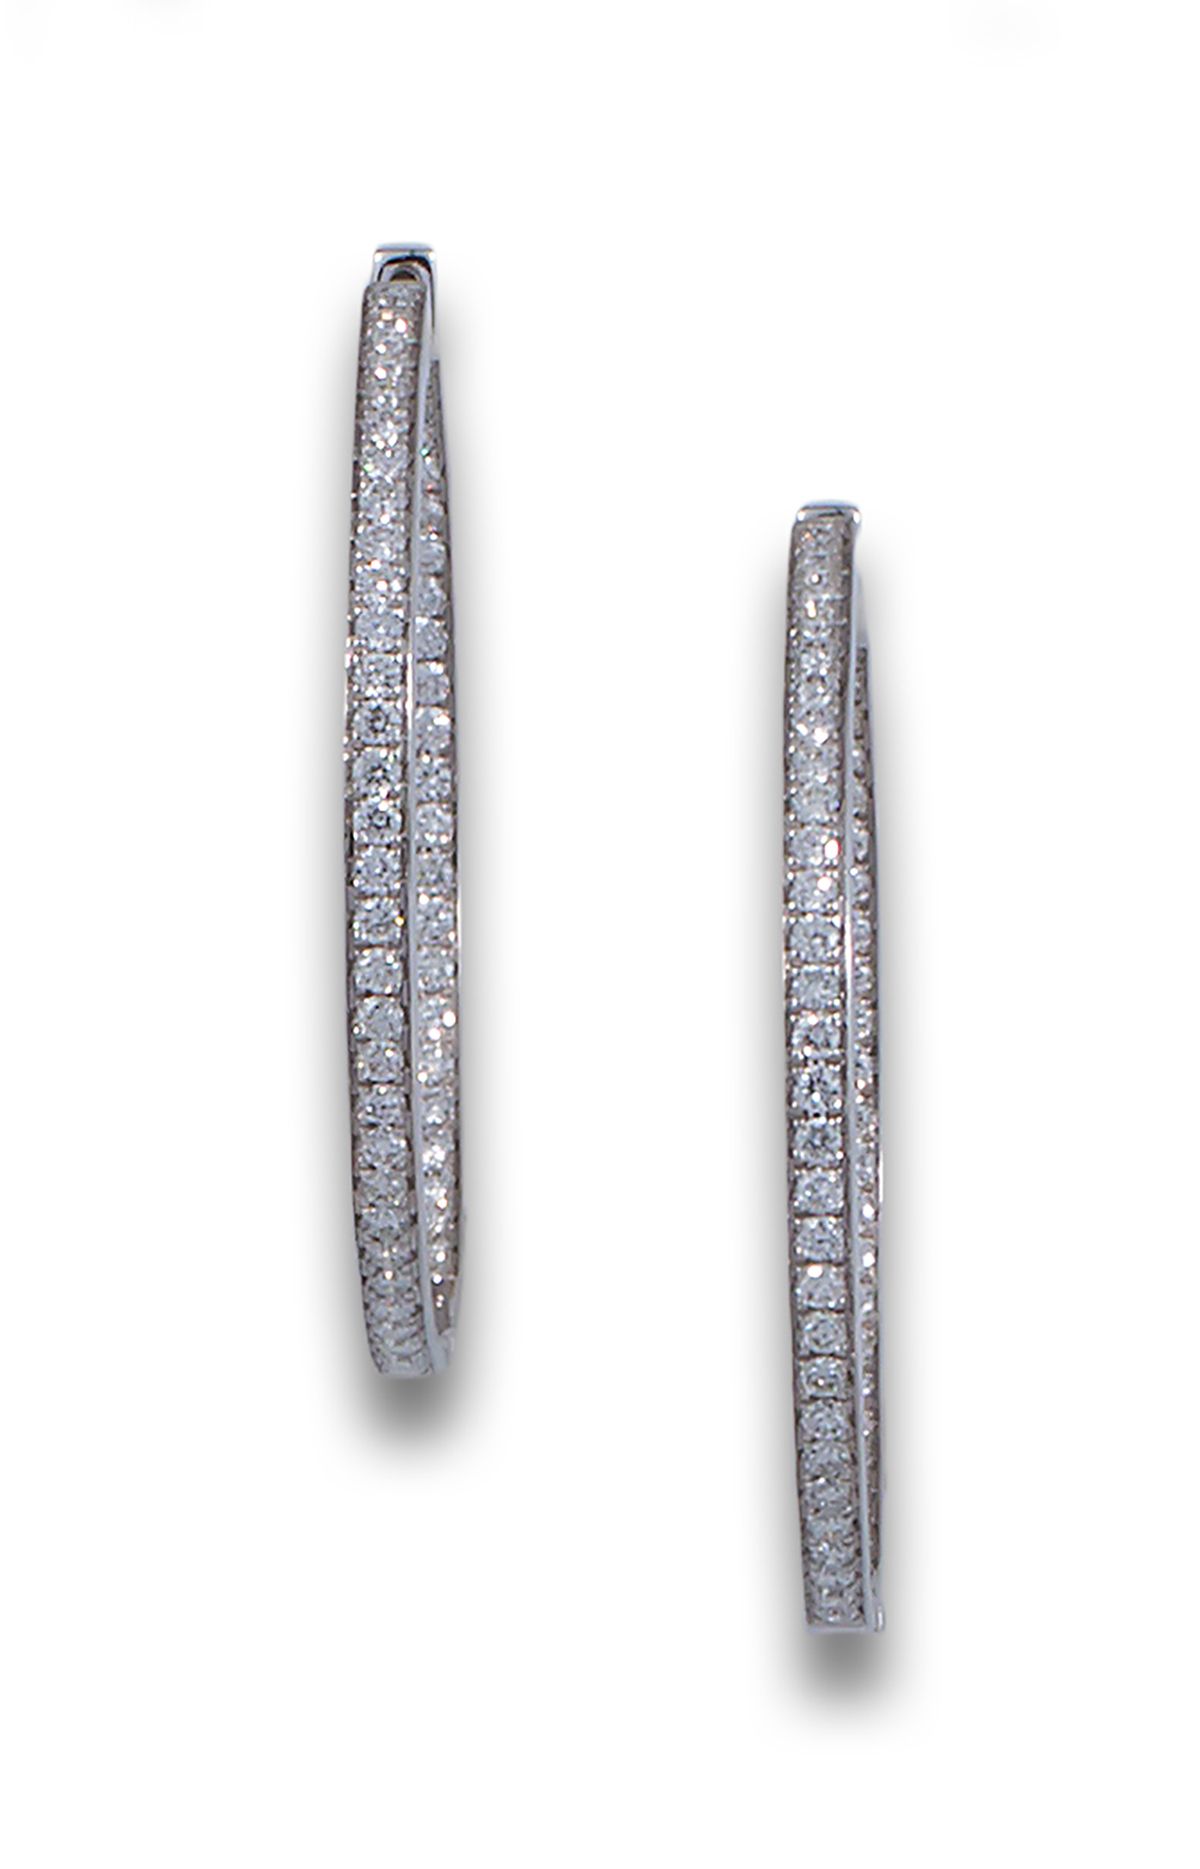 WHITE GOLD PAVE DIAMOND HOOPS 18k white gold earrings, with 110 brilliant-cut di&hellip;